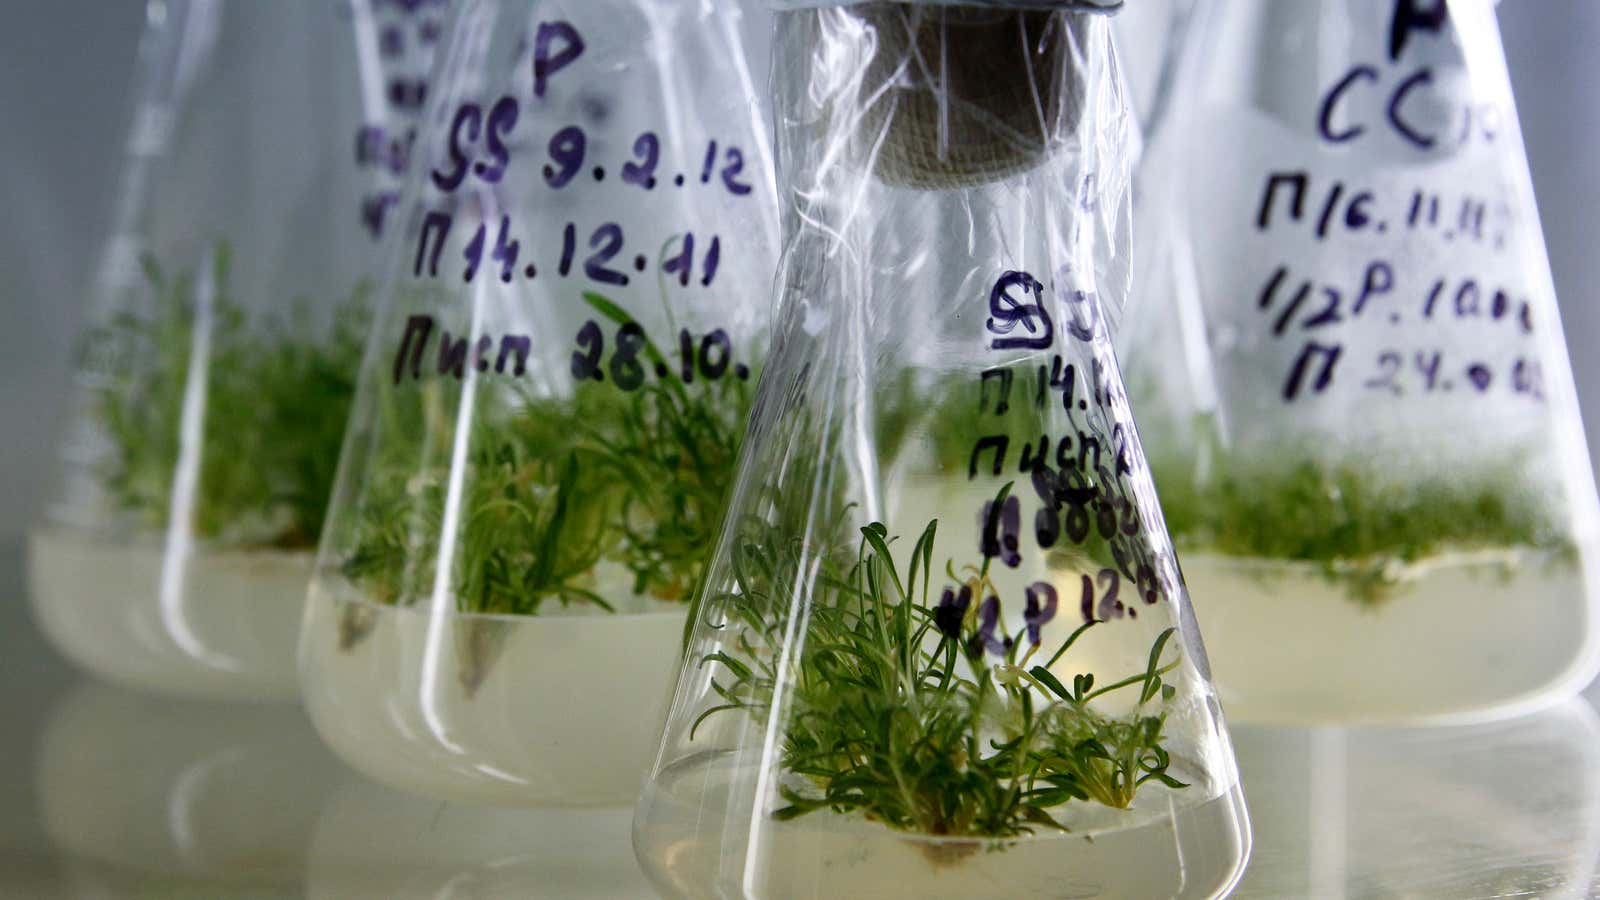 Genetically altered seeds will feed the next billion whether we like it or not.